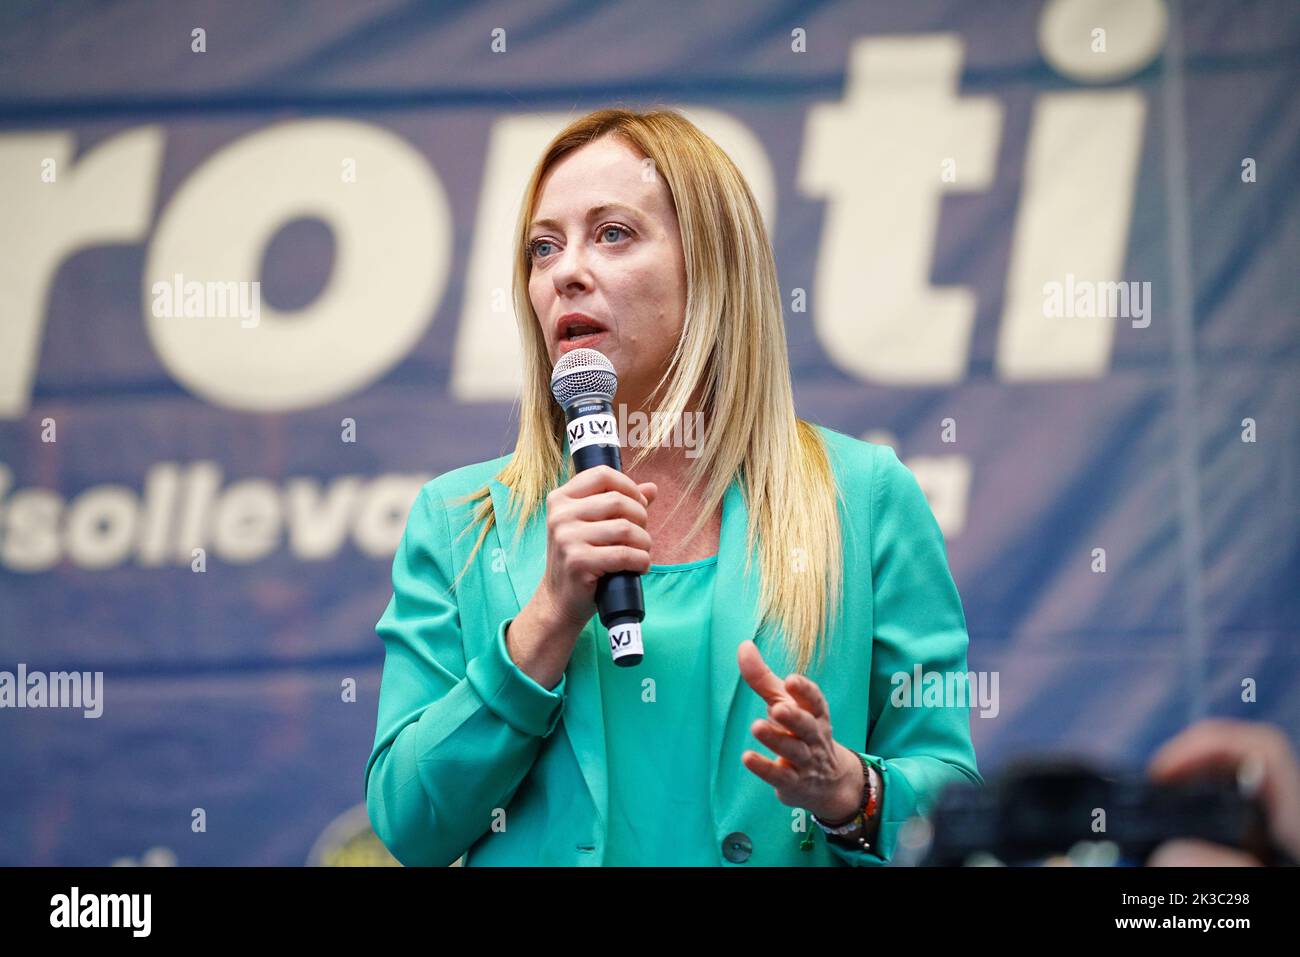 Electoral rally by Giorgia Meloni, leader of Fratelli d'Italia party, candidate for premier in the political elections. Turin, Italy - September 2022 Stock Photo